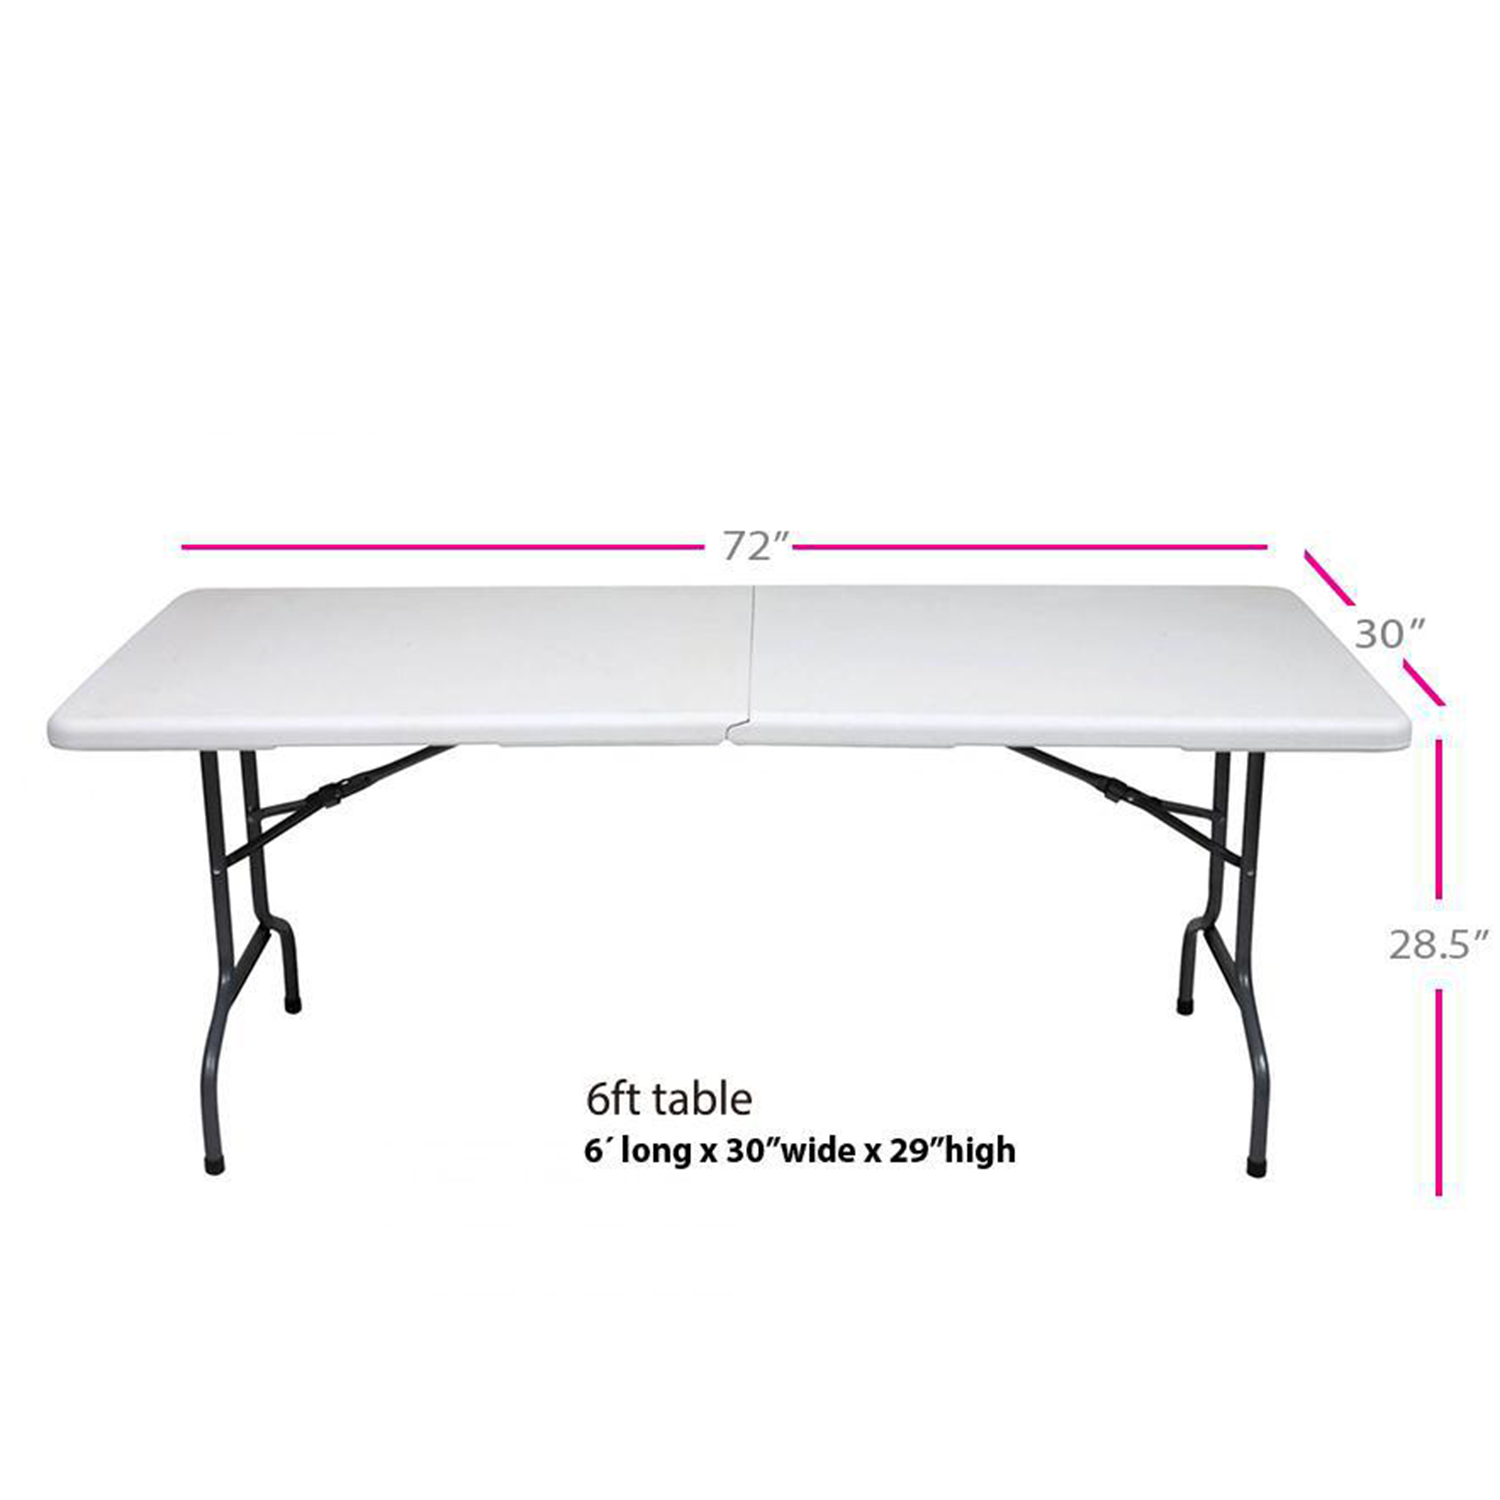 4 Sided 6ft. Stretch Cover (C/R)